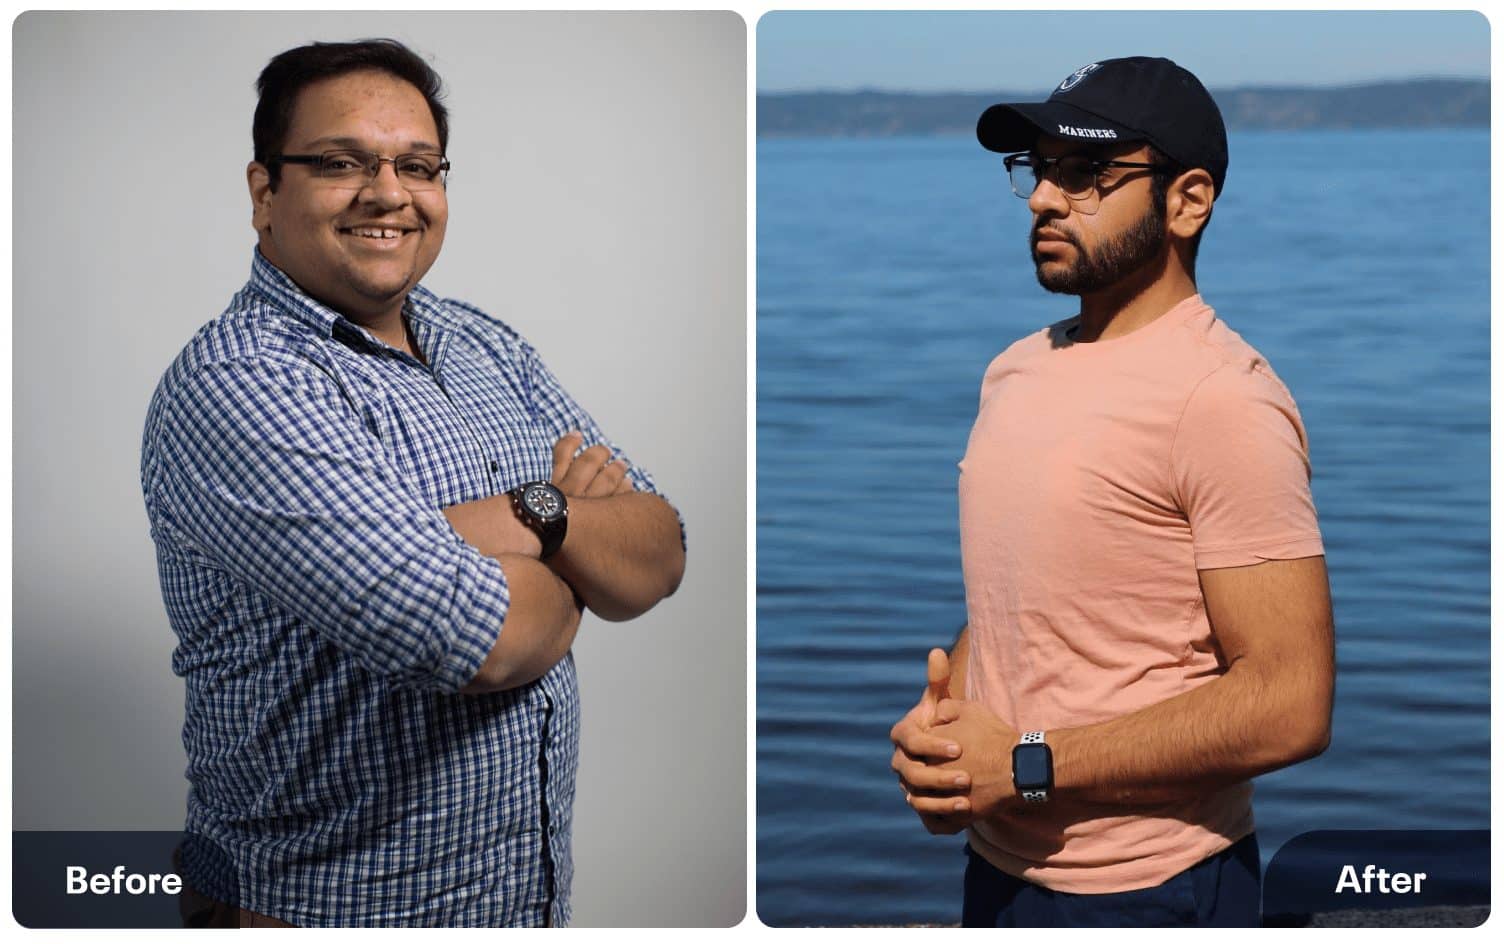 How This “Data Guy” Used MyFitnessPal to Lose 143 Pounds